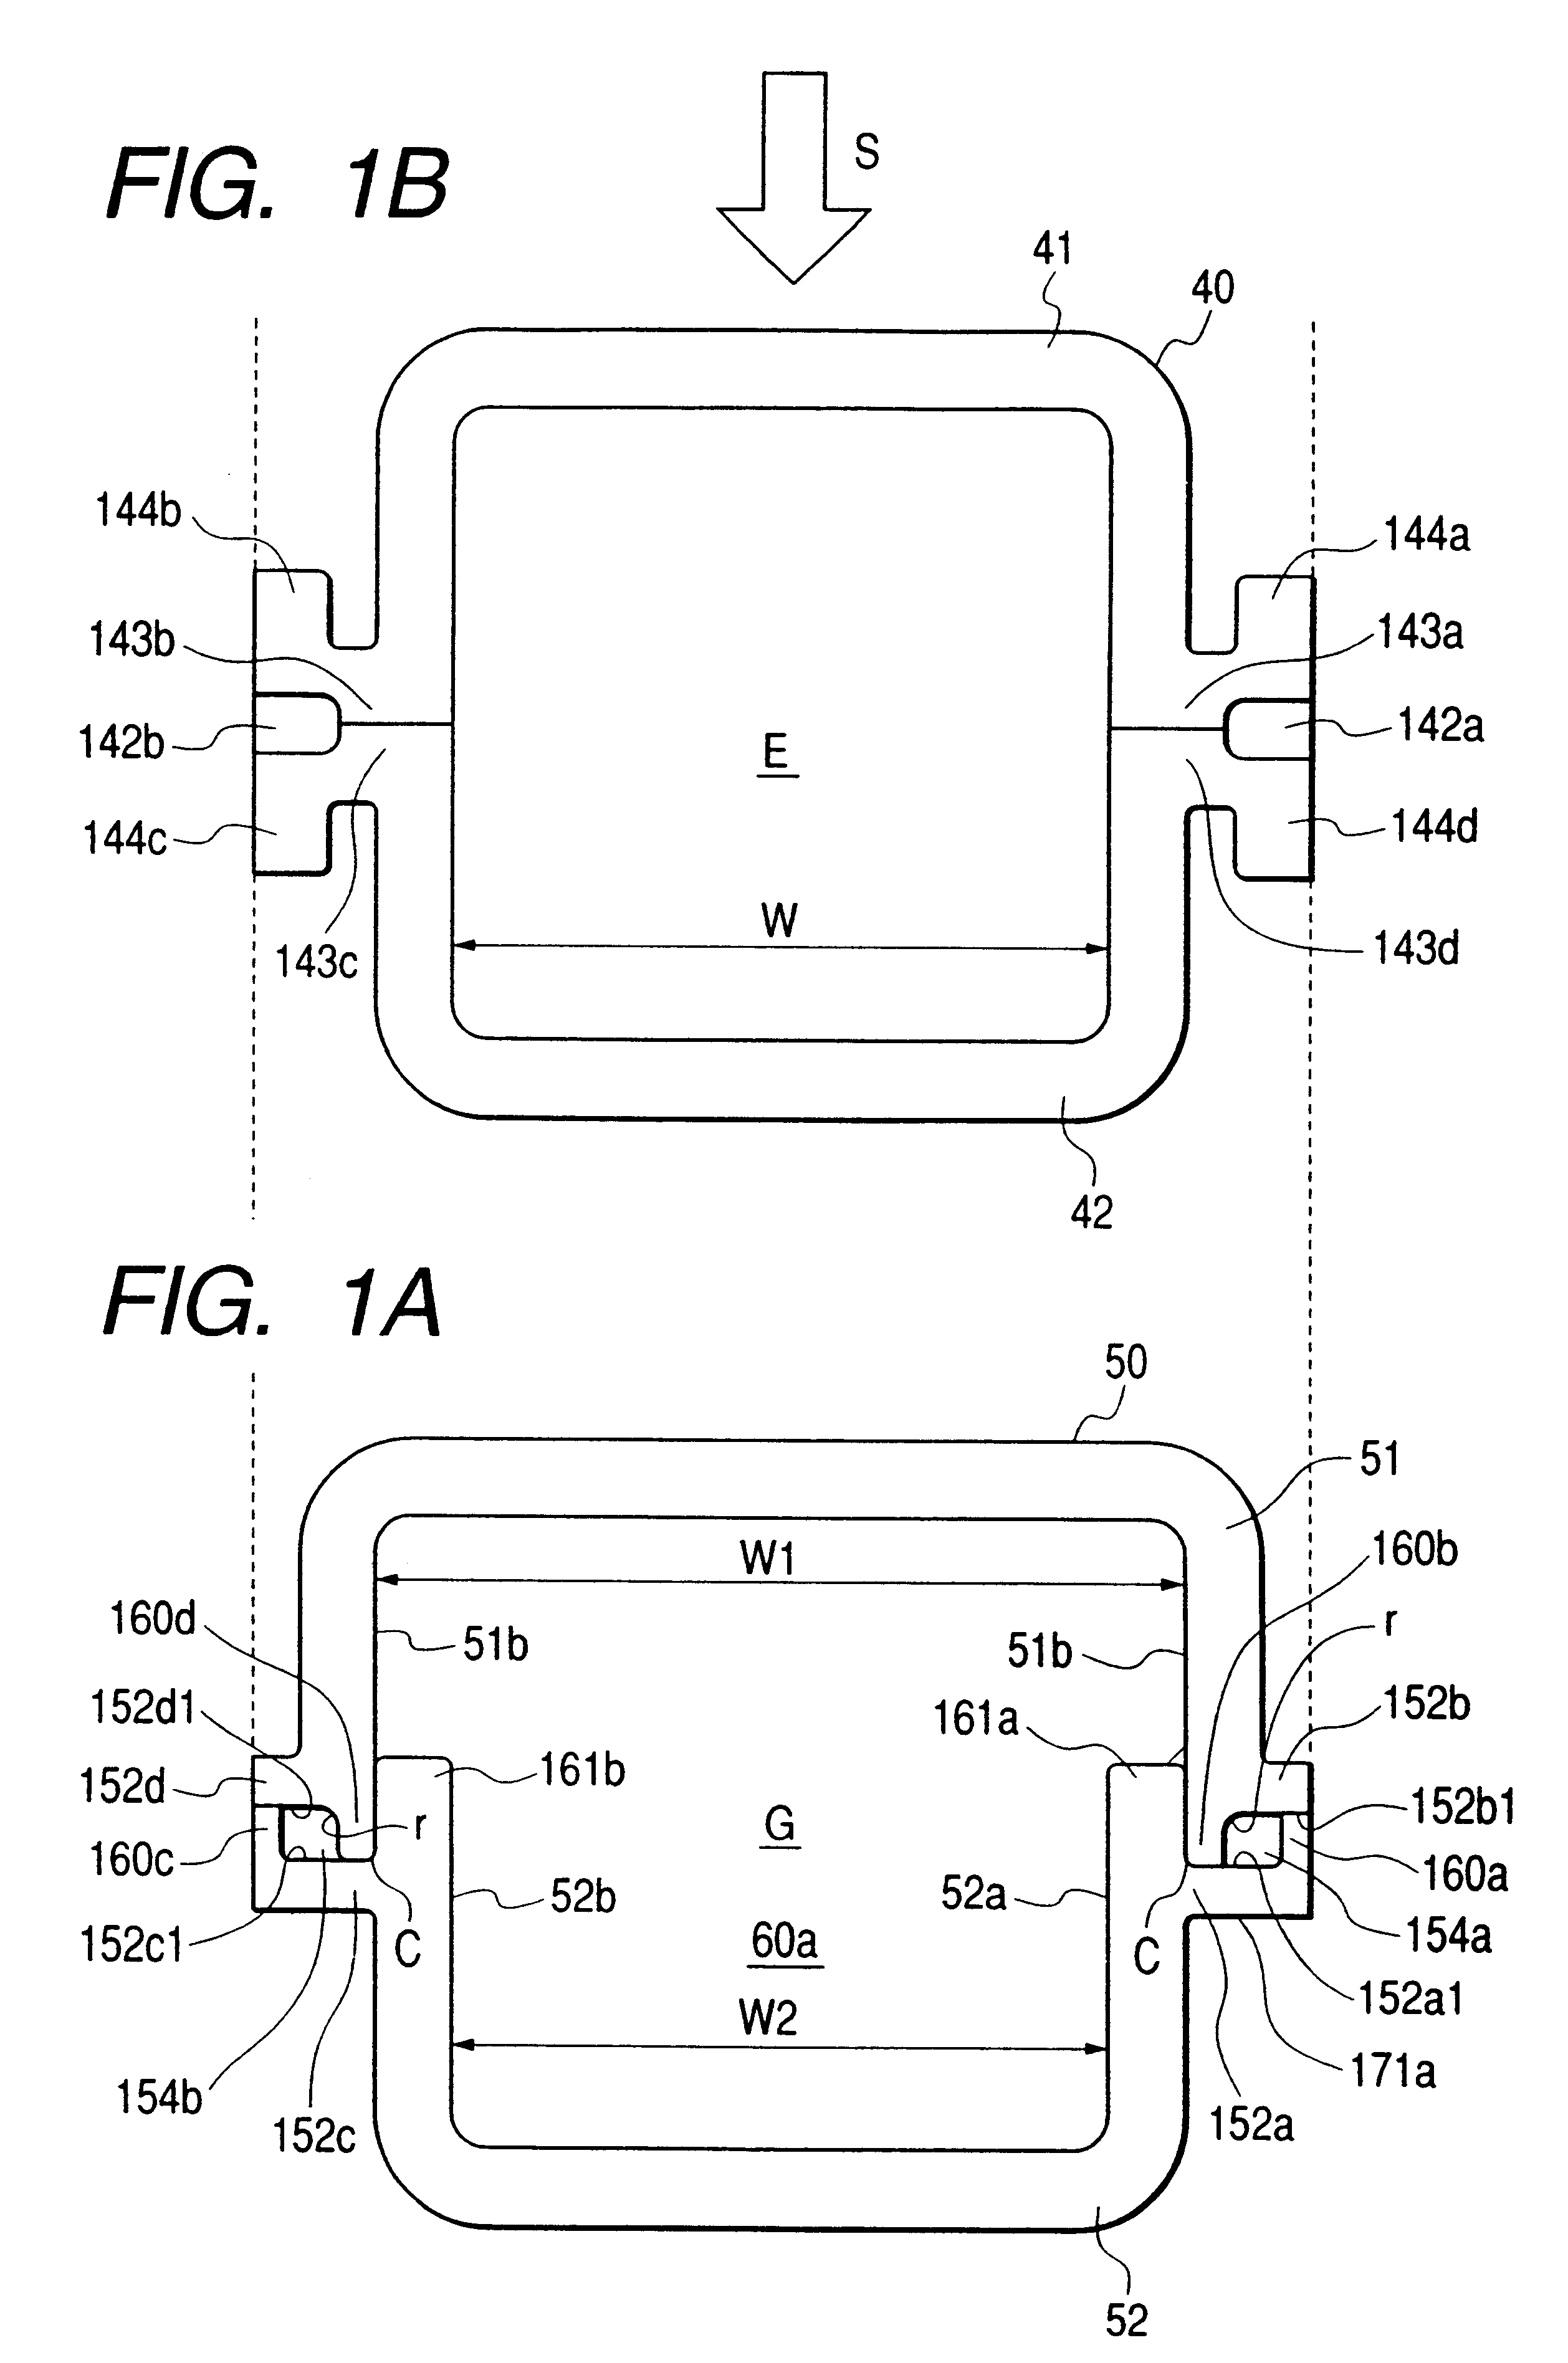 Image forming apparatus to which a process cartridge having a part connecting member is detachably mountable, process cartridge having a part connecting member, and part connecting member